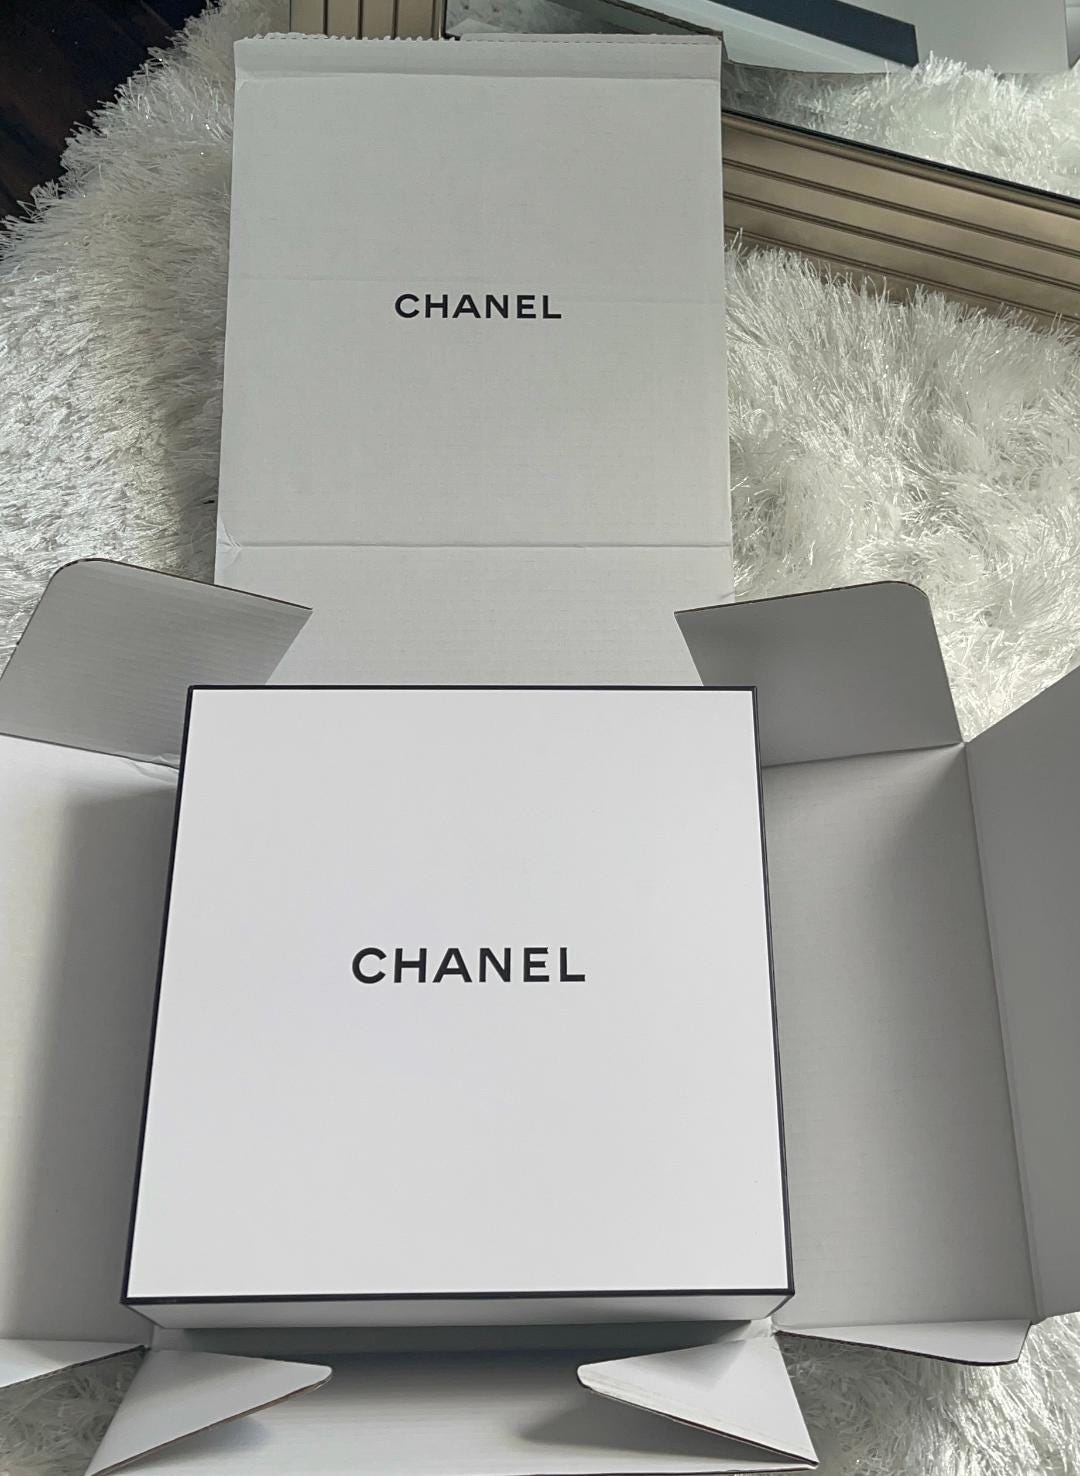 I Bought the Cheapest Item from Chanel: What I Learned